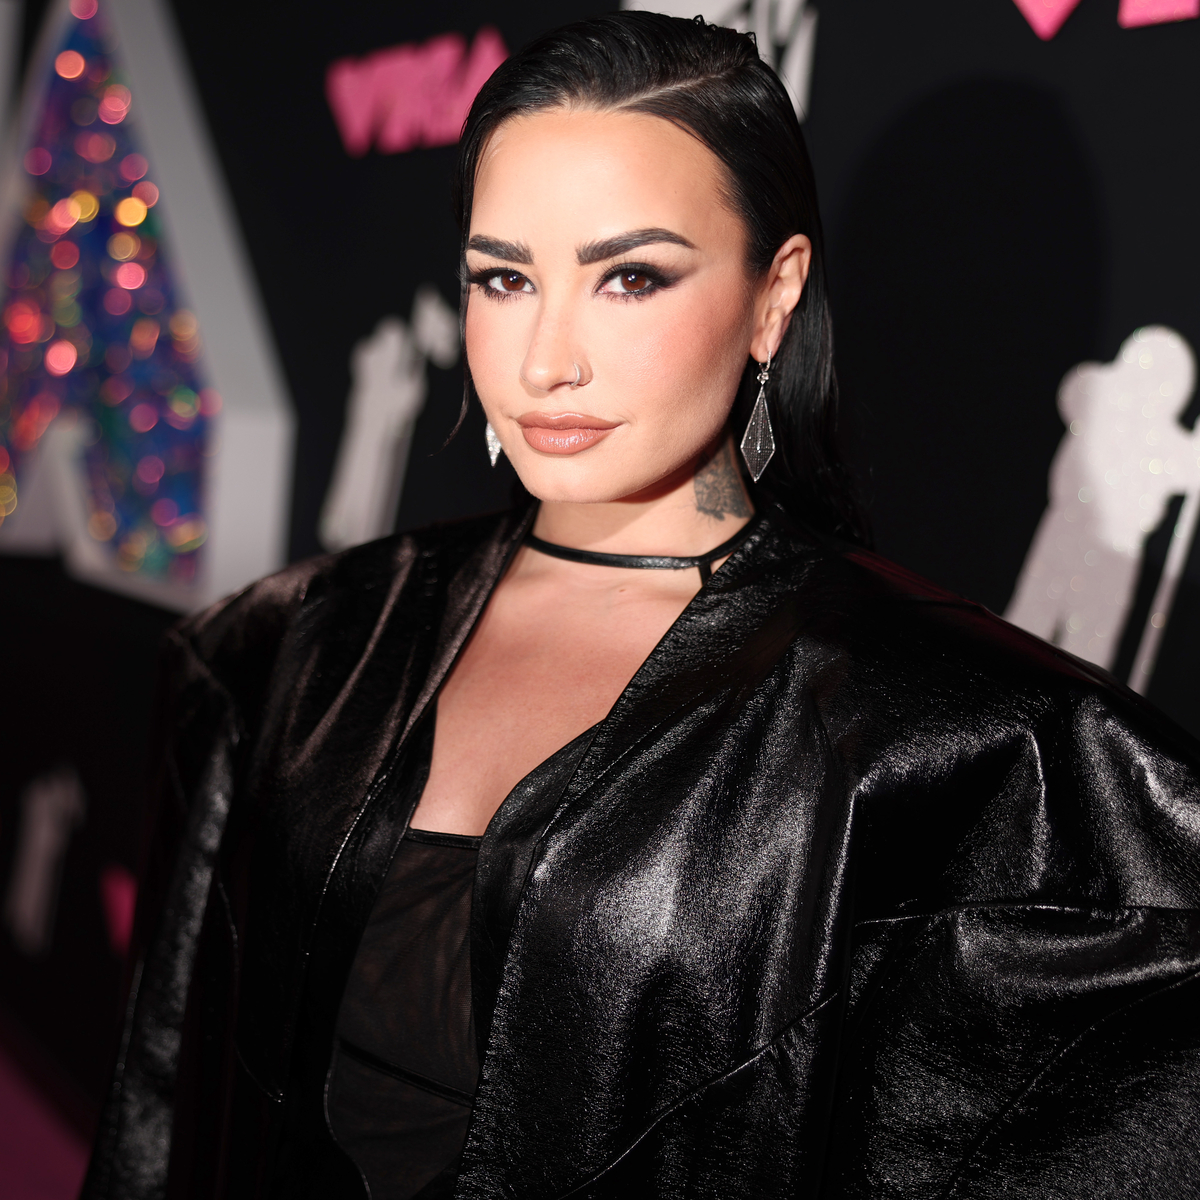 Demi Lovato Reveals the One Thing She'd Tell Her Teenage Self About Beauty